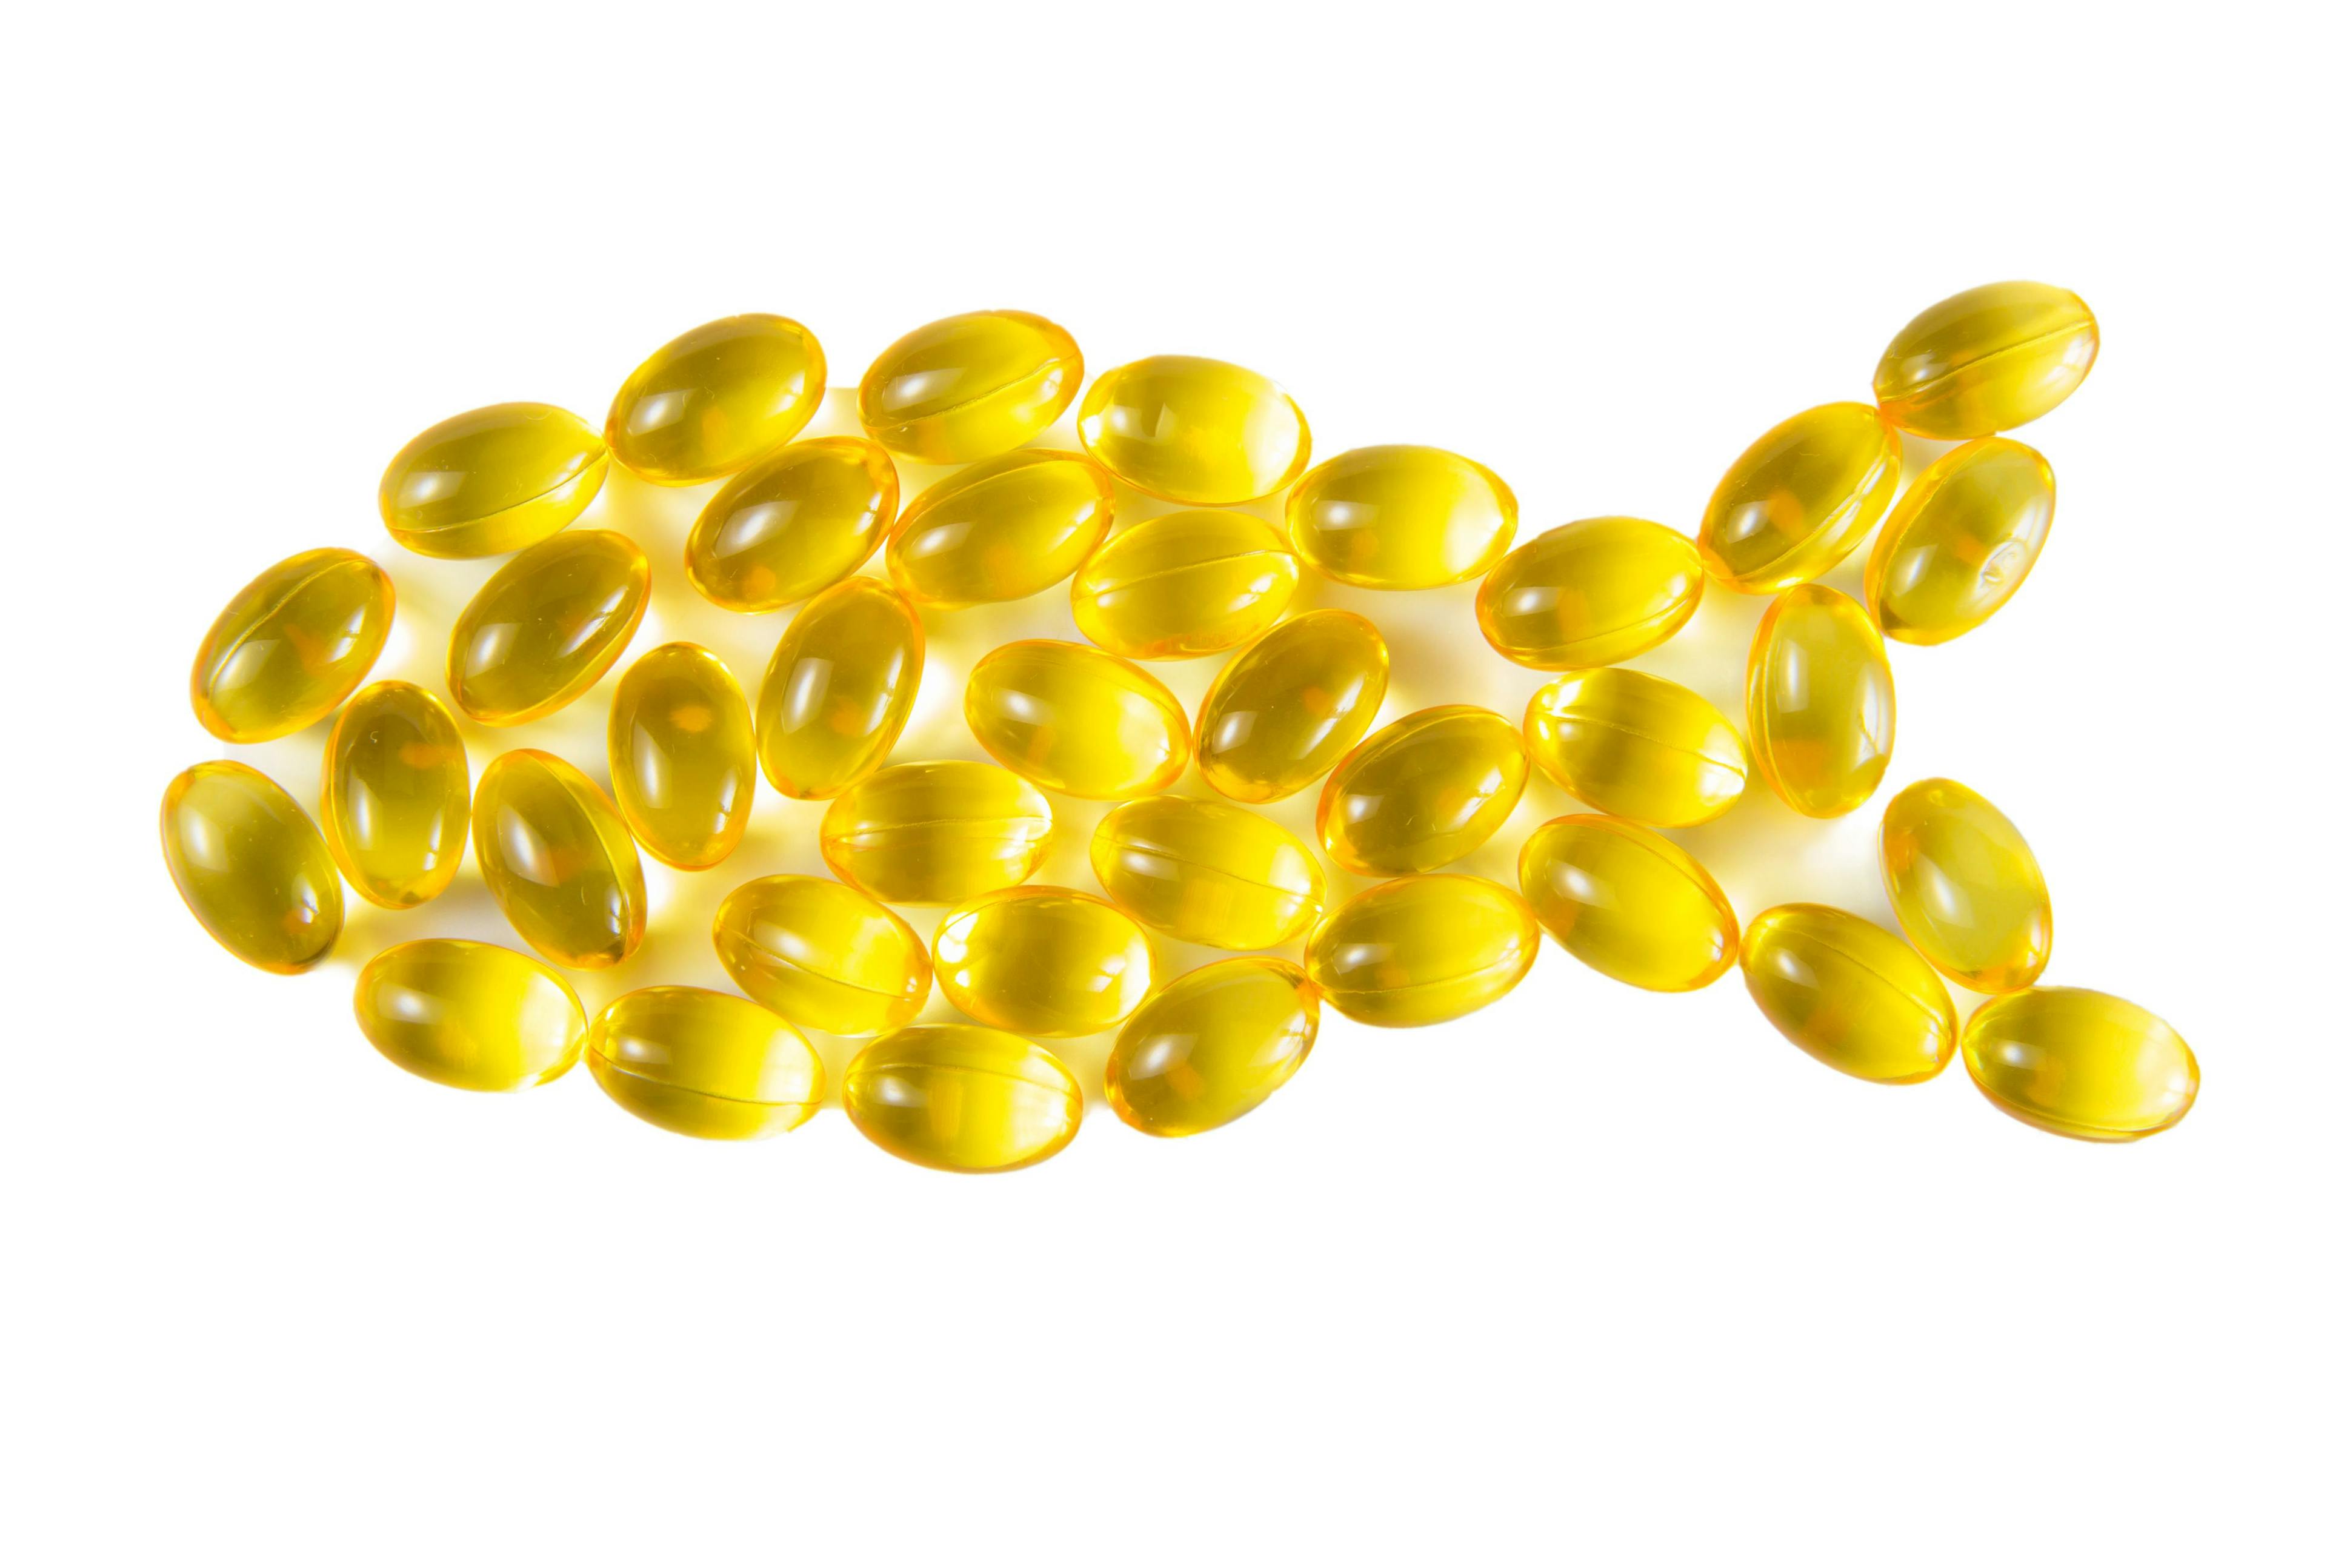 The Story of Fish Oil